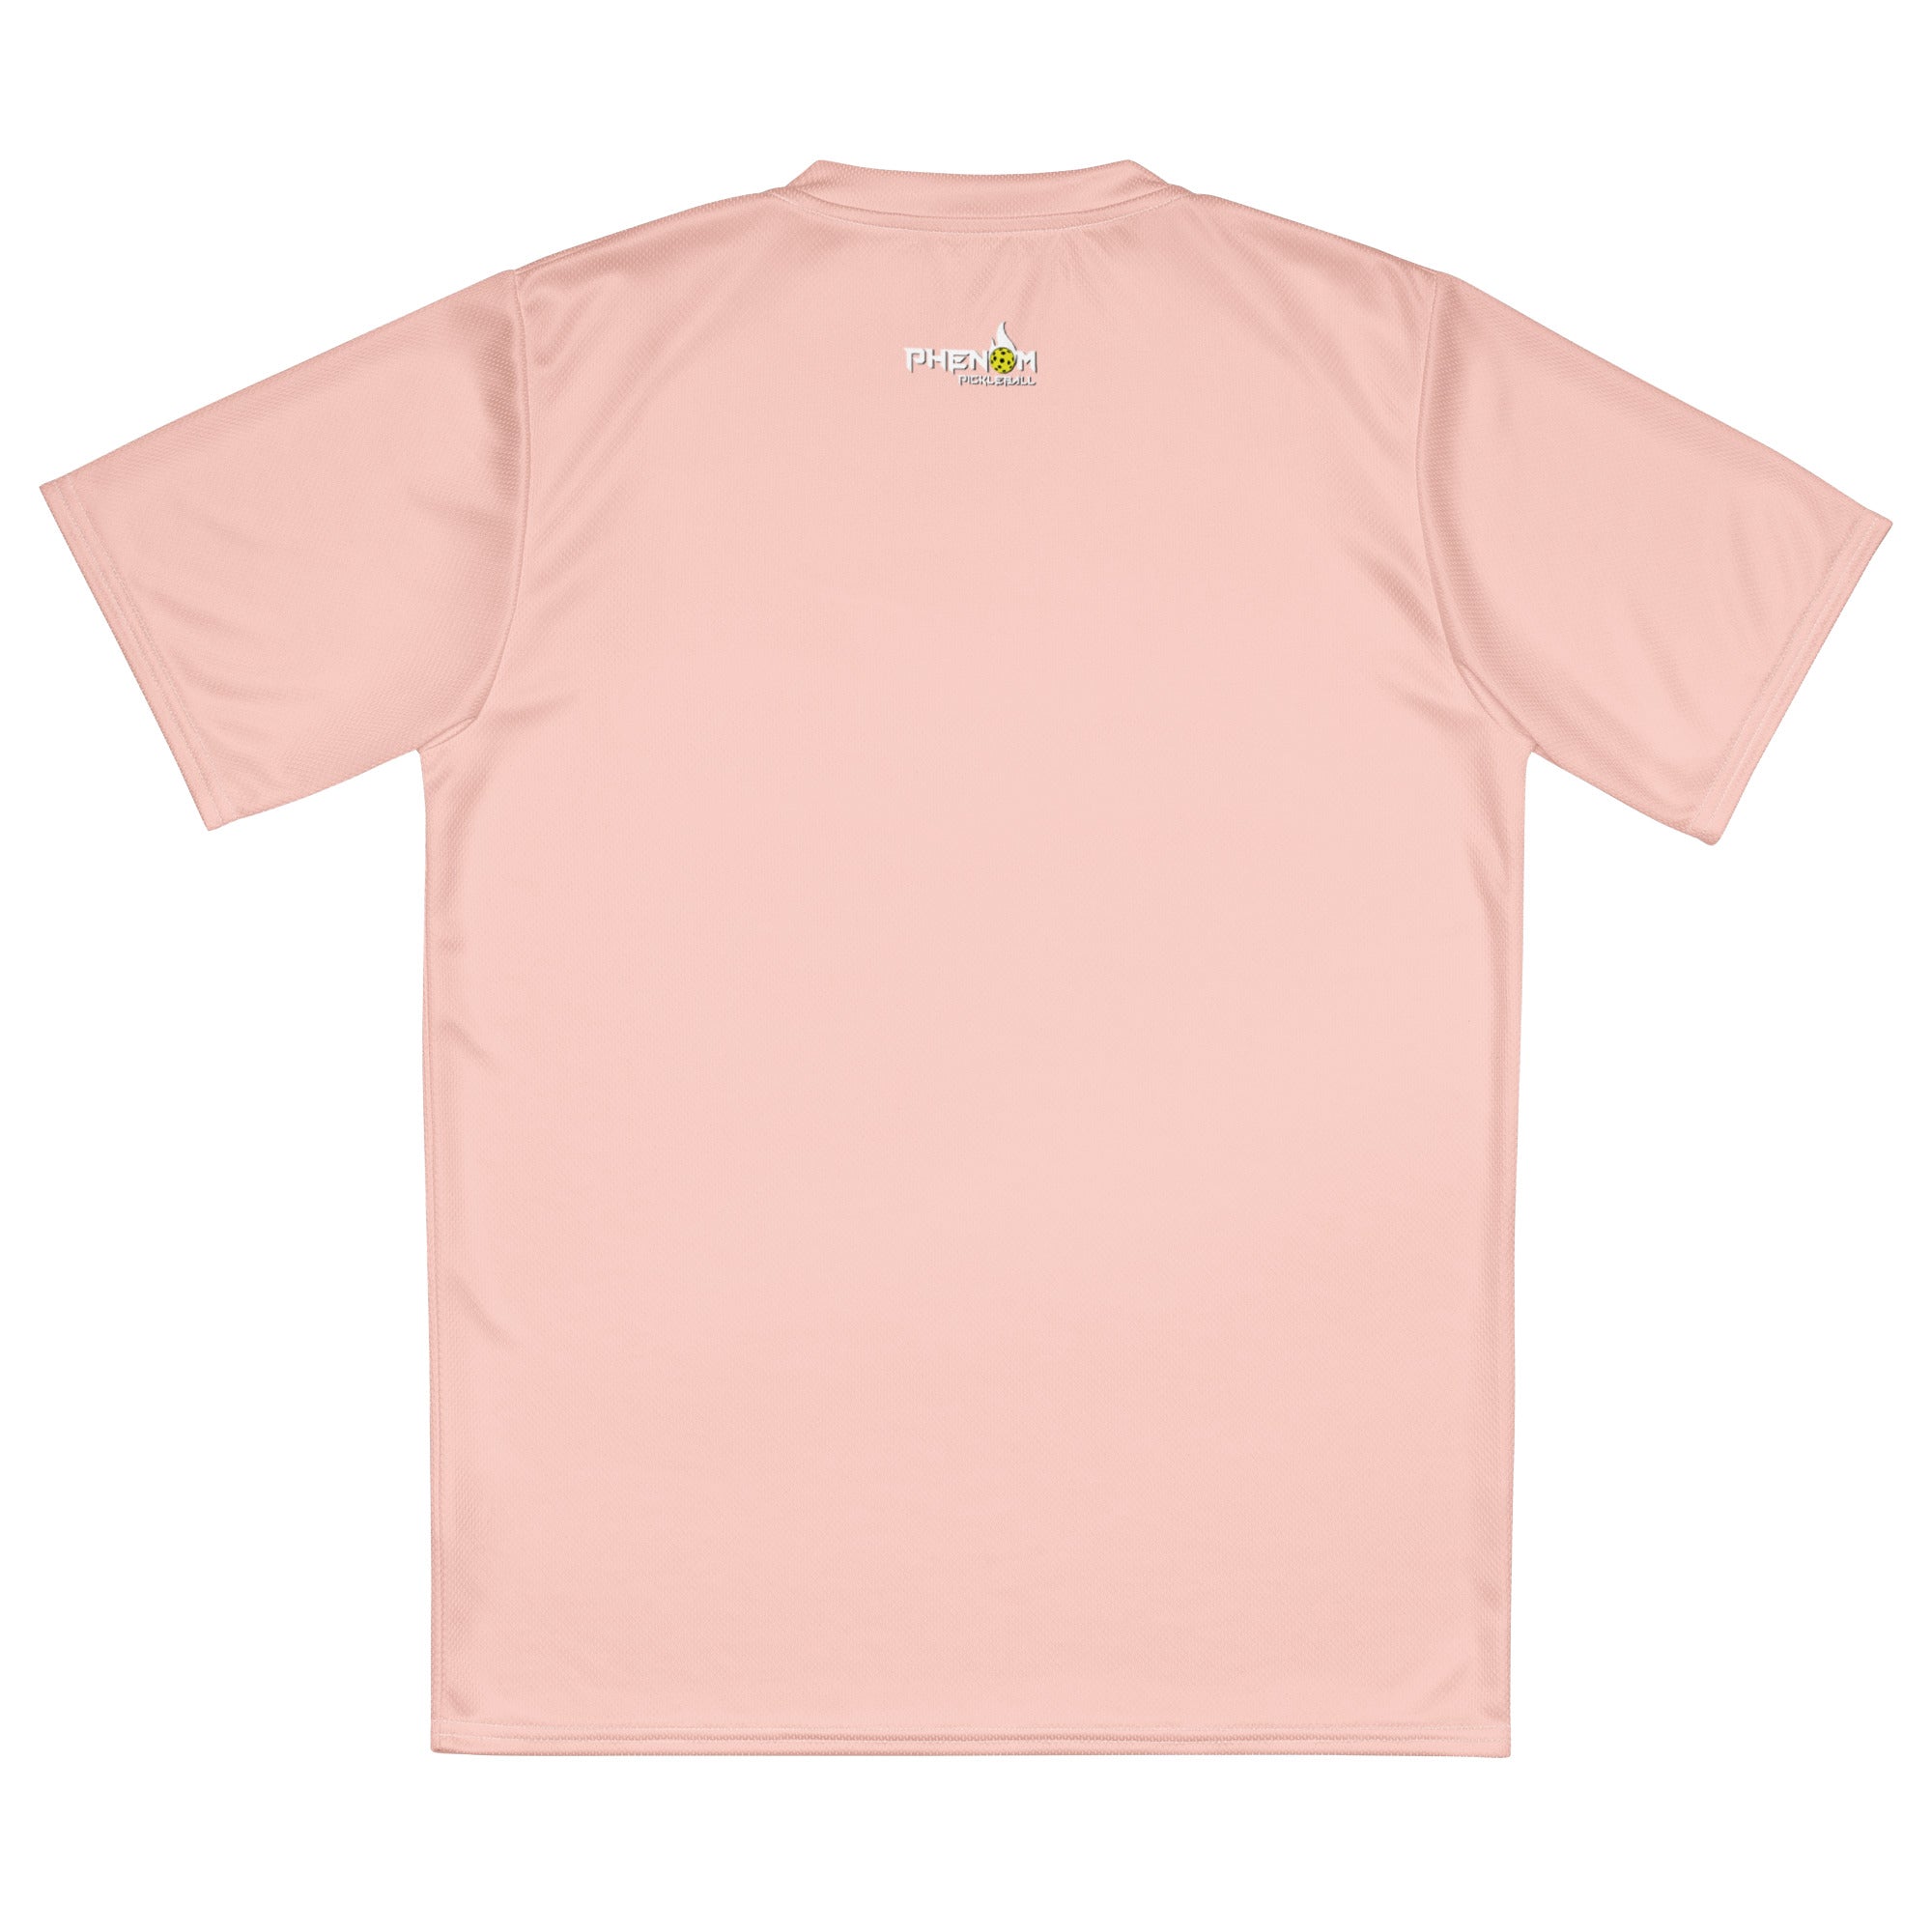 flat placement pink match point pickleball shirt performance apparel athletic top phenom logo back view